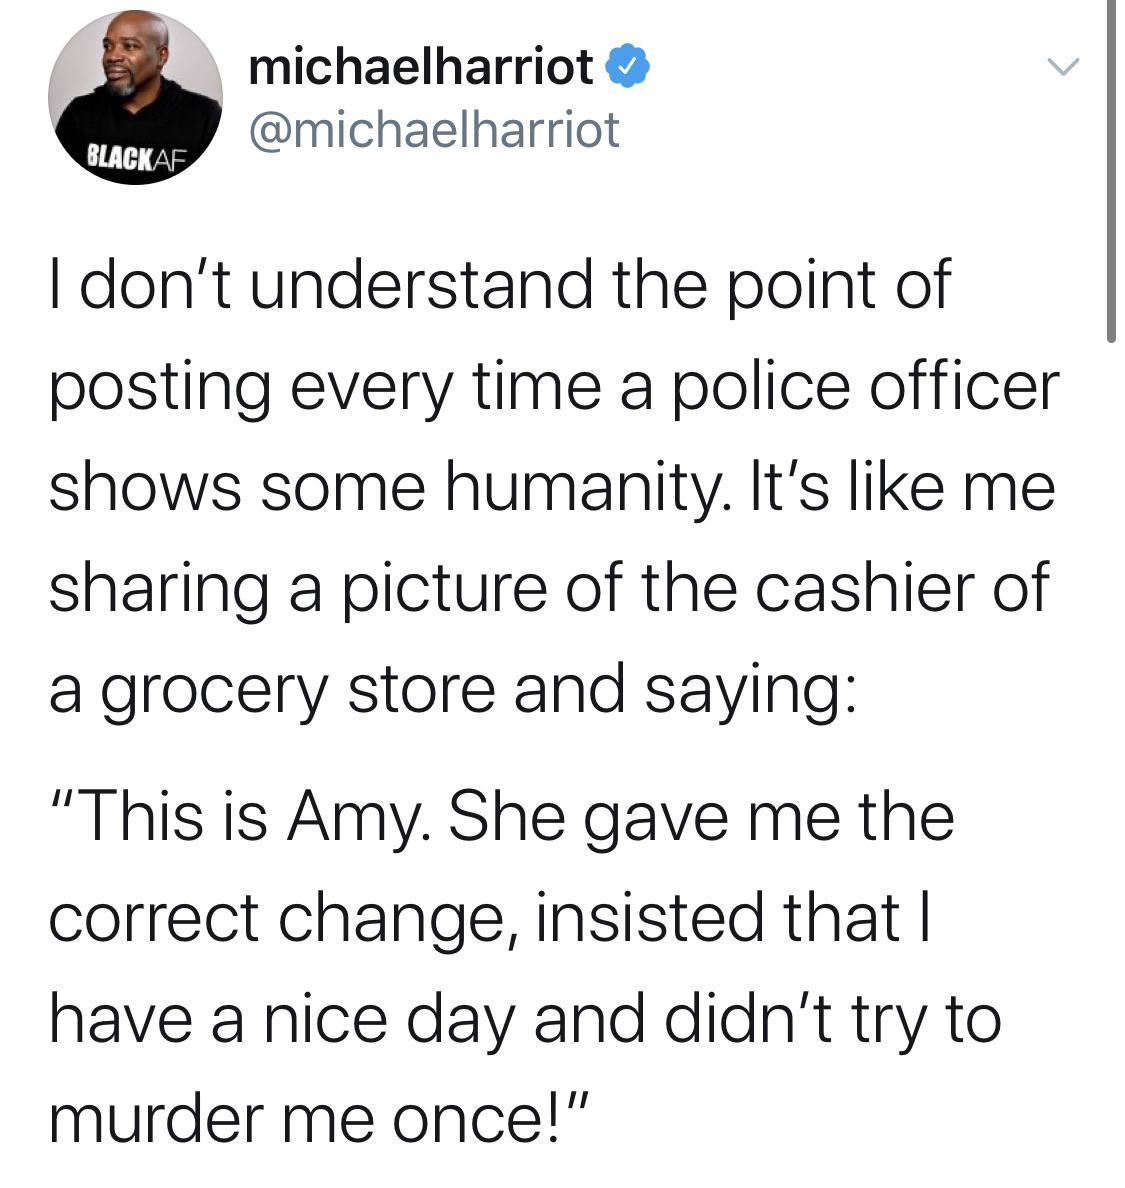 Tweets, As Black Twitter Memes Tweets, As text: michaelharriot @michaelharriot BUCKAF I don't understand the point of posting every time a police officer shows some humanity. It's like me sharing a picture of the cashier of a grocery store and saying: 